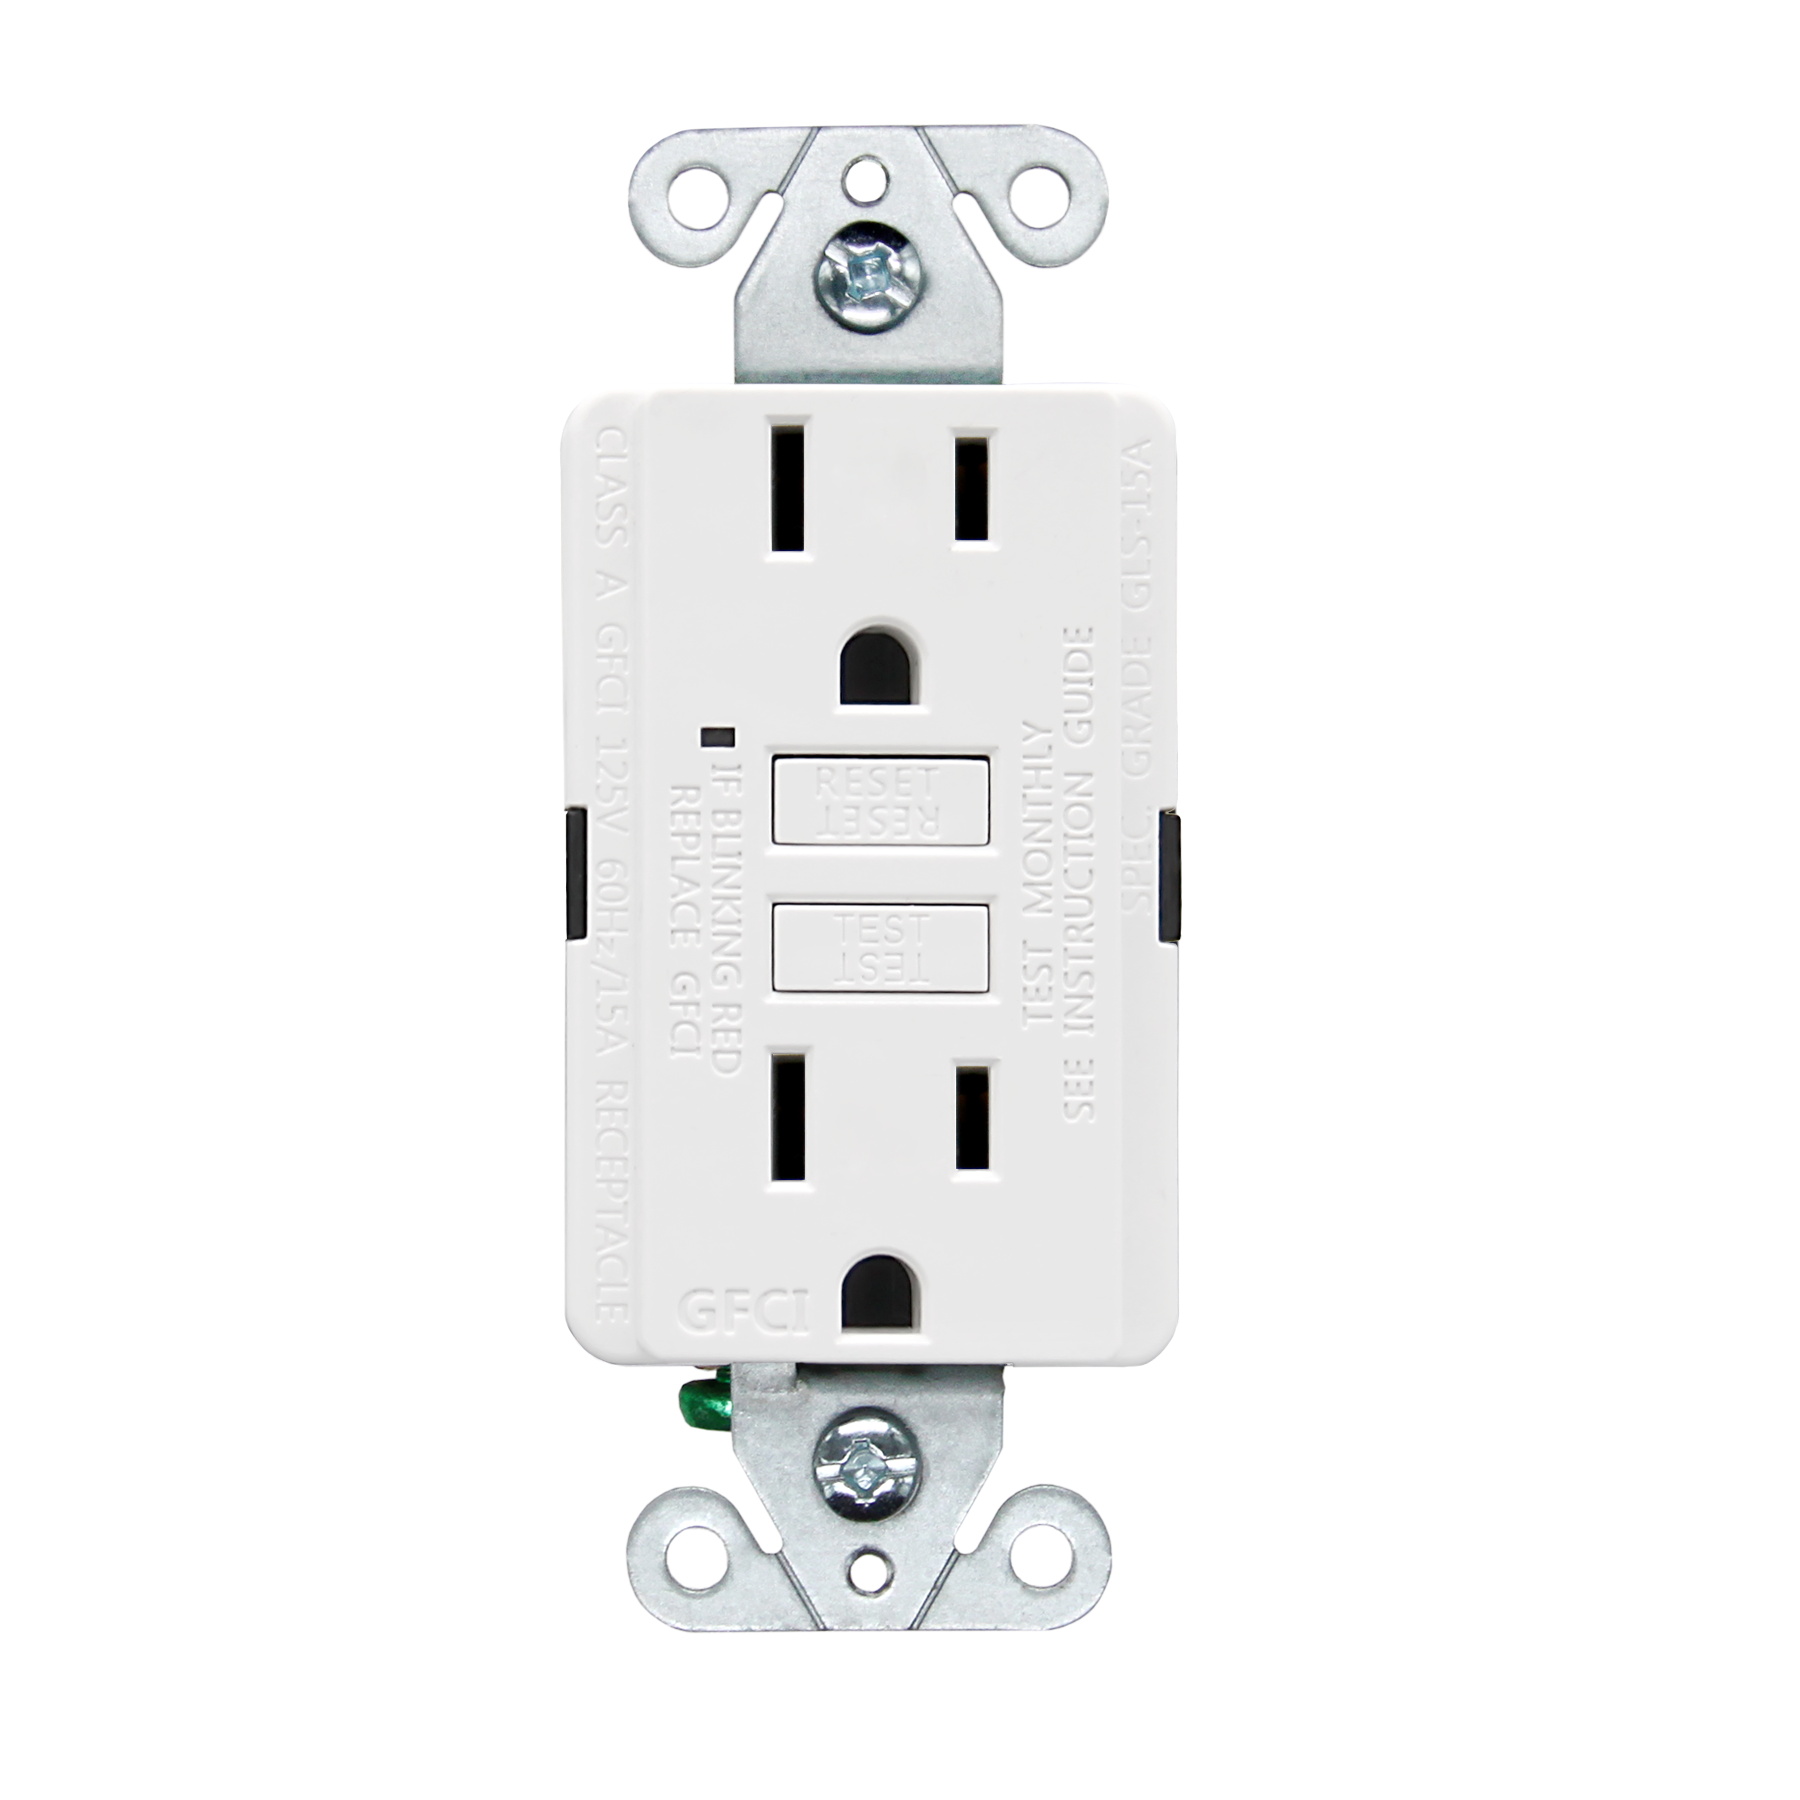 American 15 Amp Self-Test Duplex Non-Tamper-Resistant GFCI Receptacle Wall  Electrical Outlet, GLS-15A Featured Image